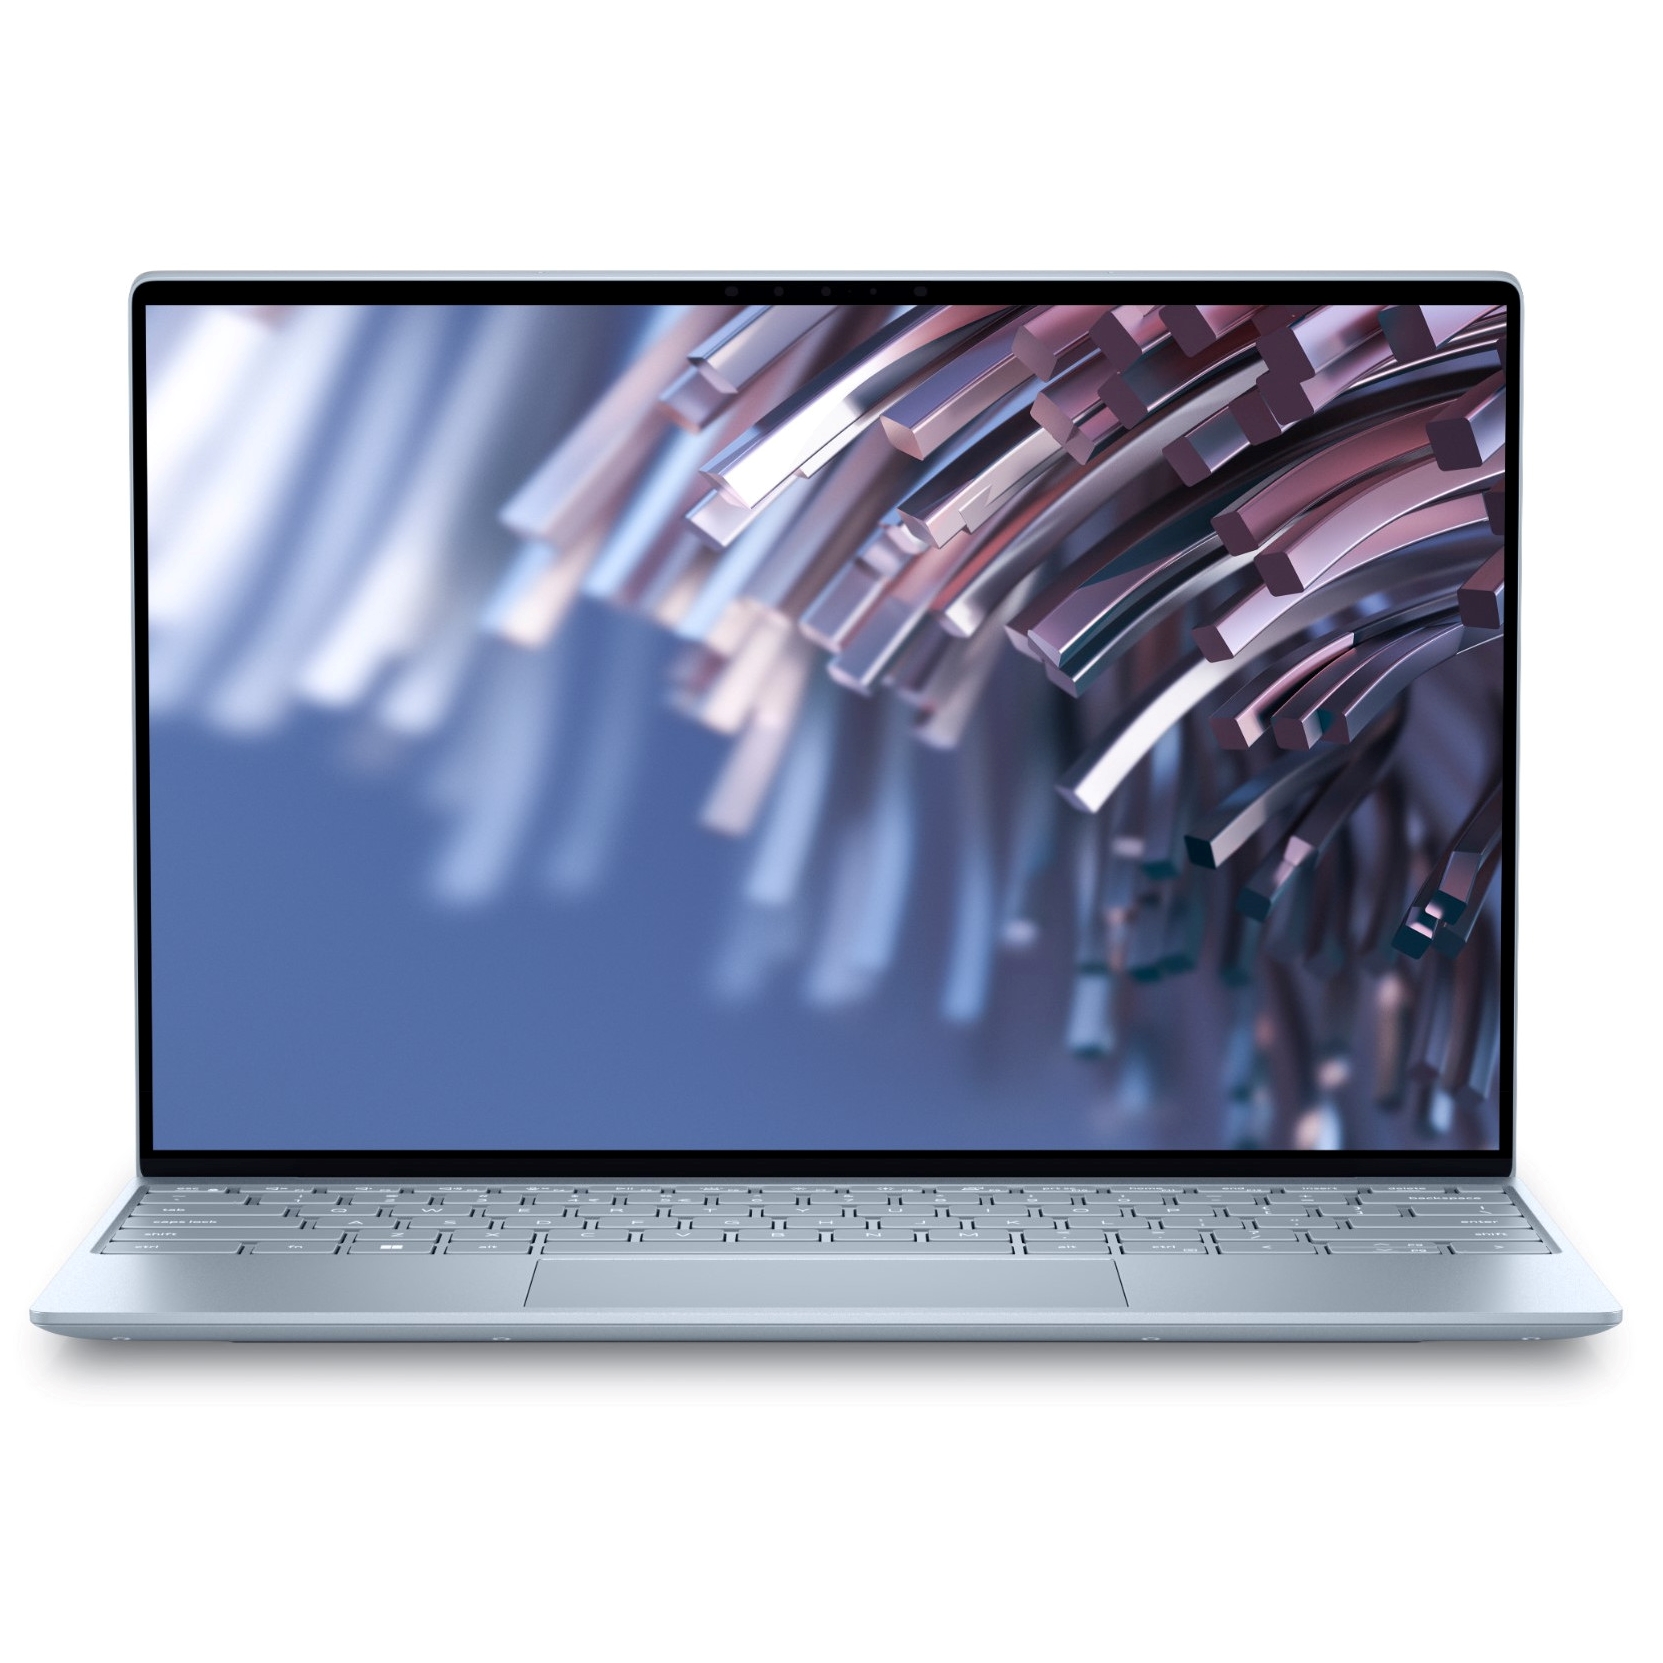 The Dell XPS 13 9315.